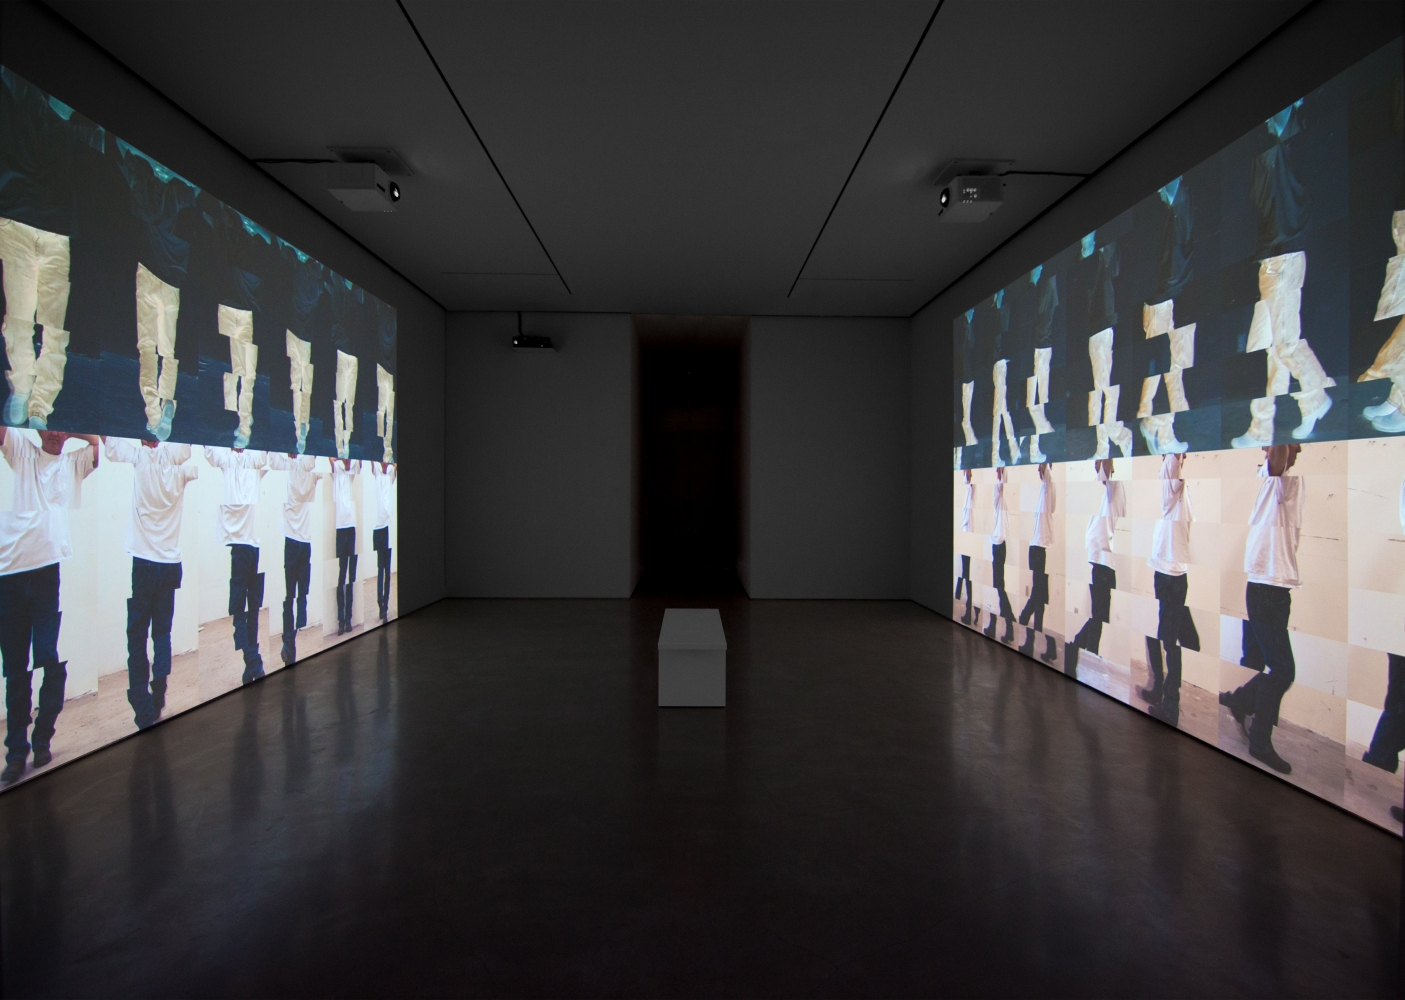 installation view of a darkened gallery with projections on opposite walls showing stacked rows of segmented man